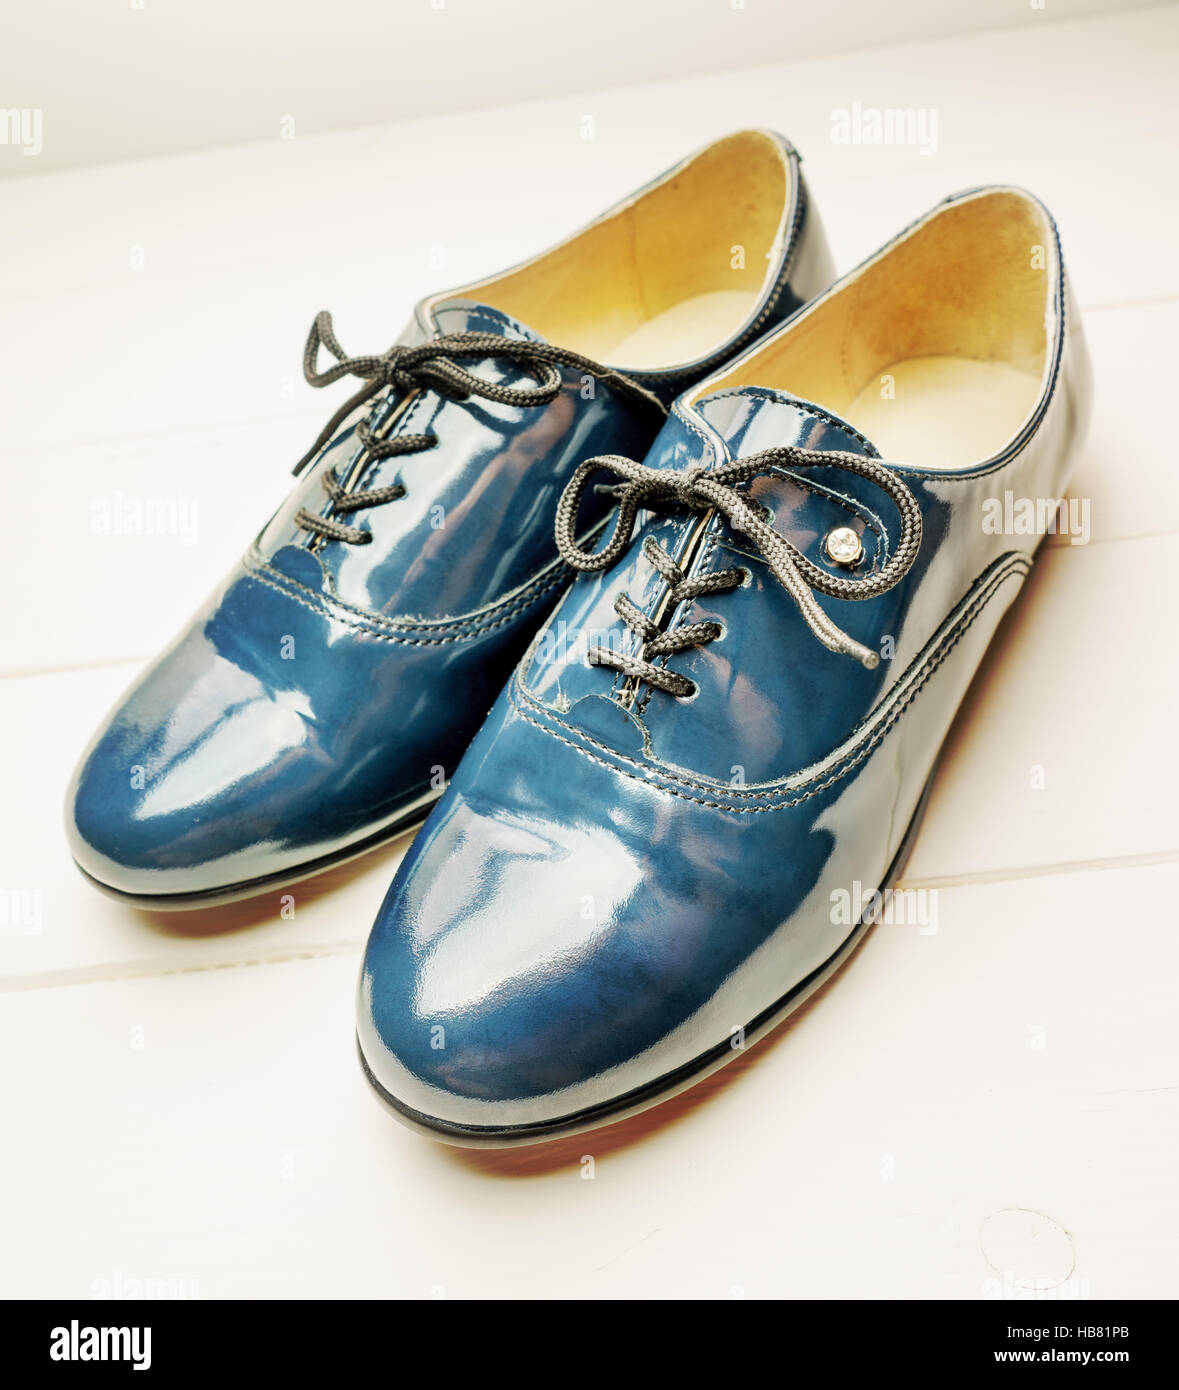 Patent leather shoes Stock Photo